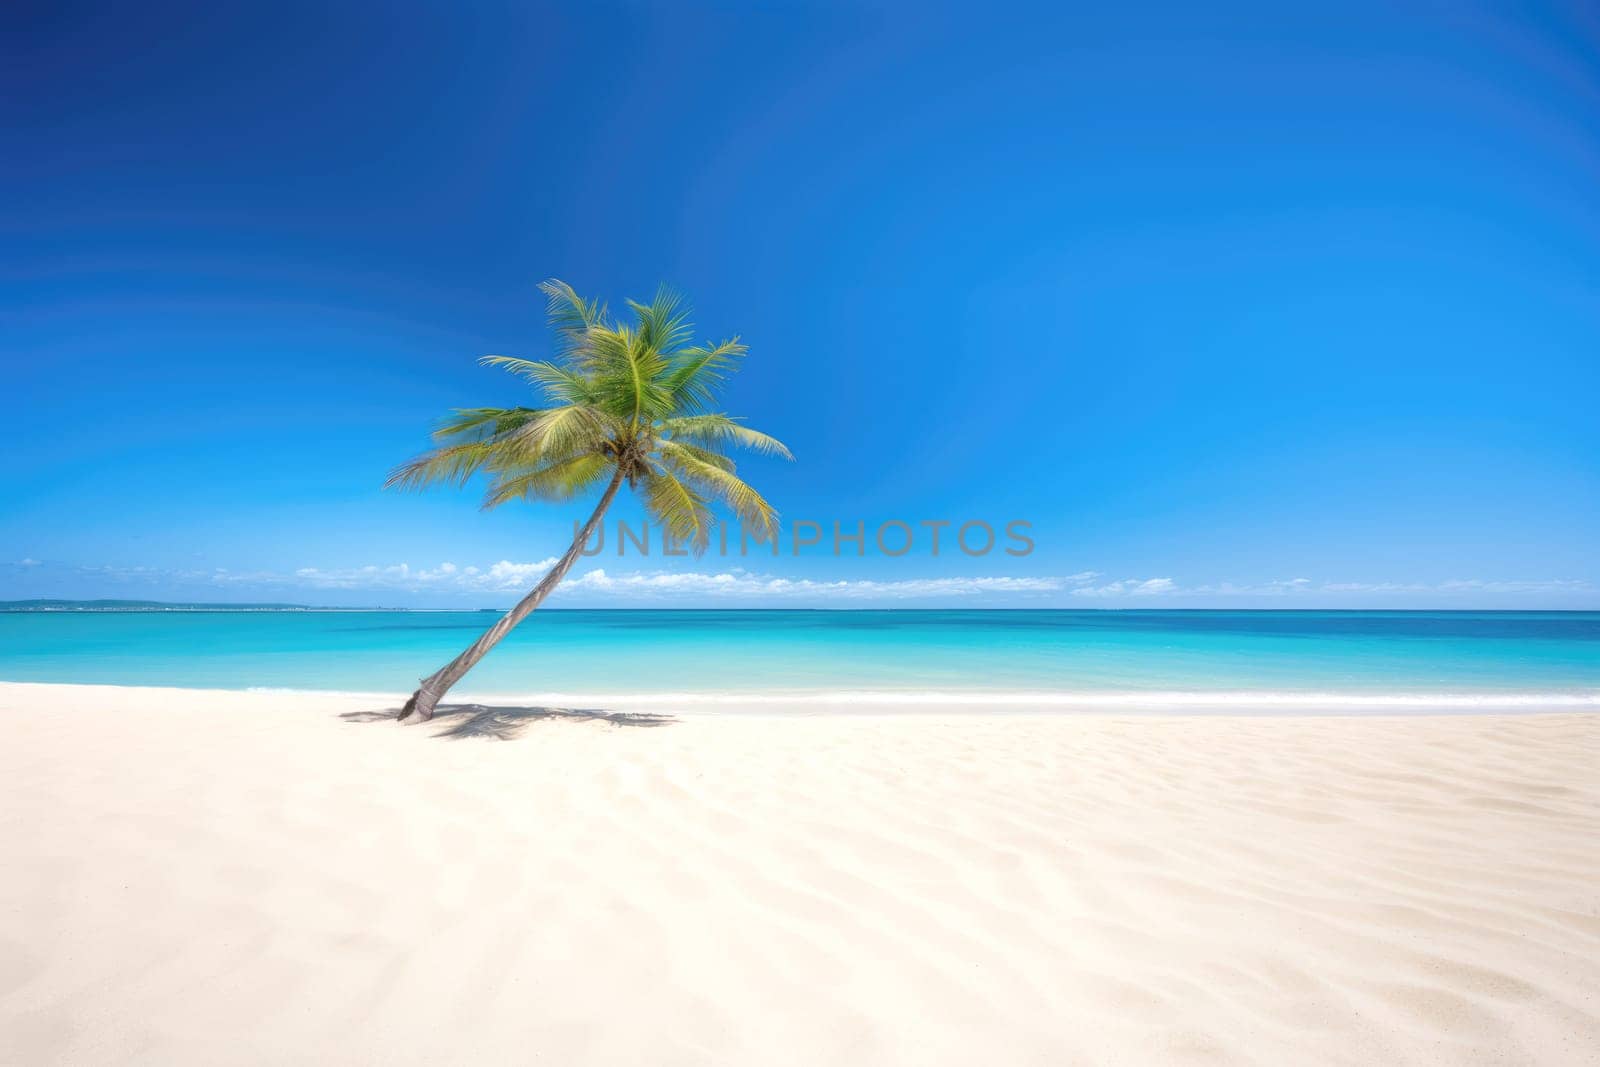 Idyllic single palm tree on a pristine tropical beach with clear turquoise waters